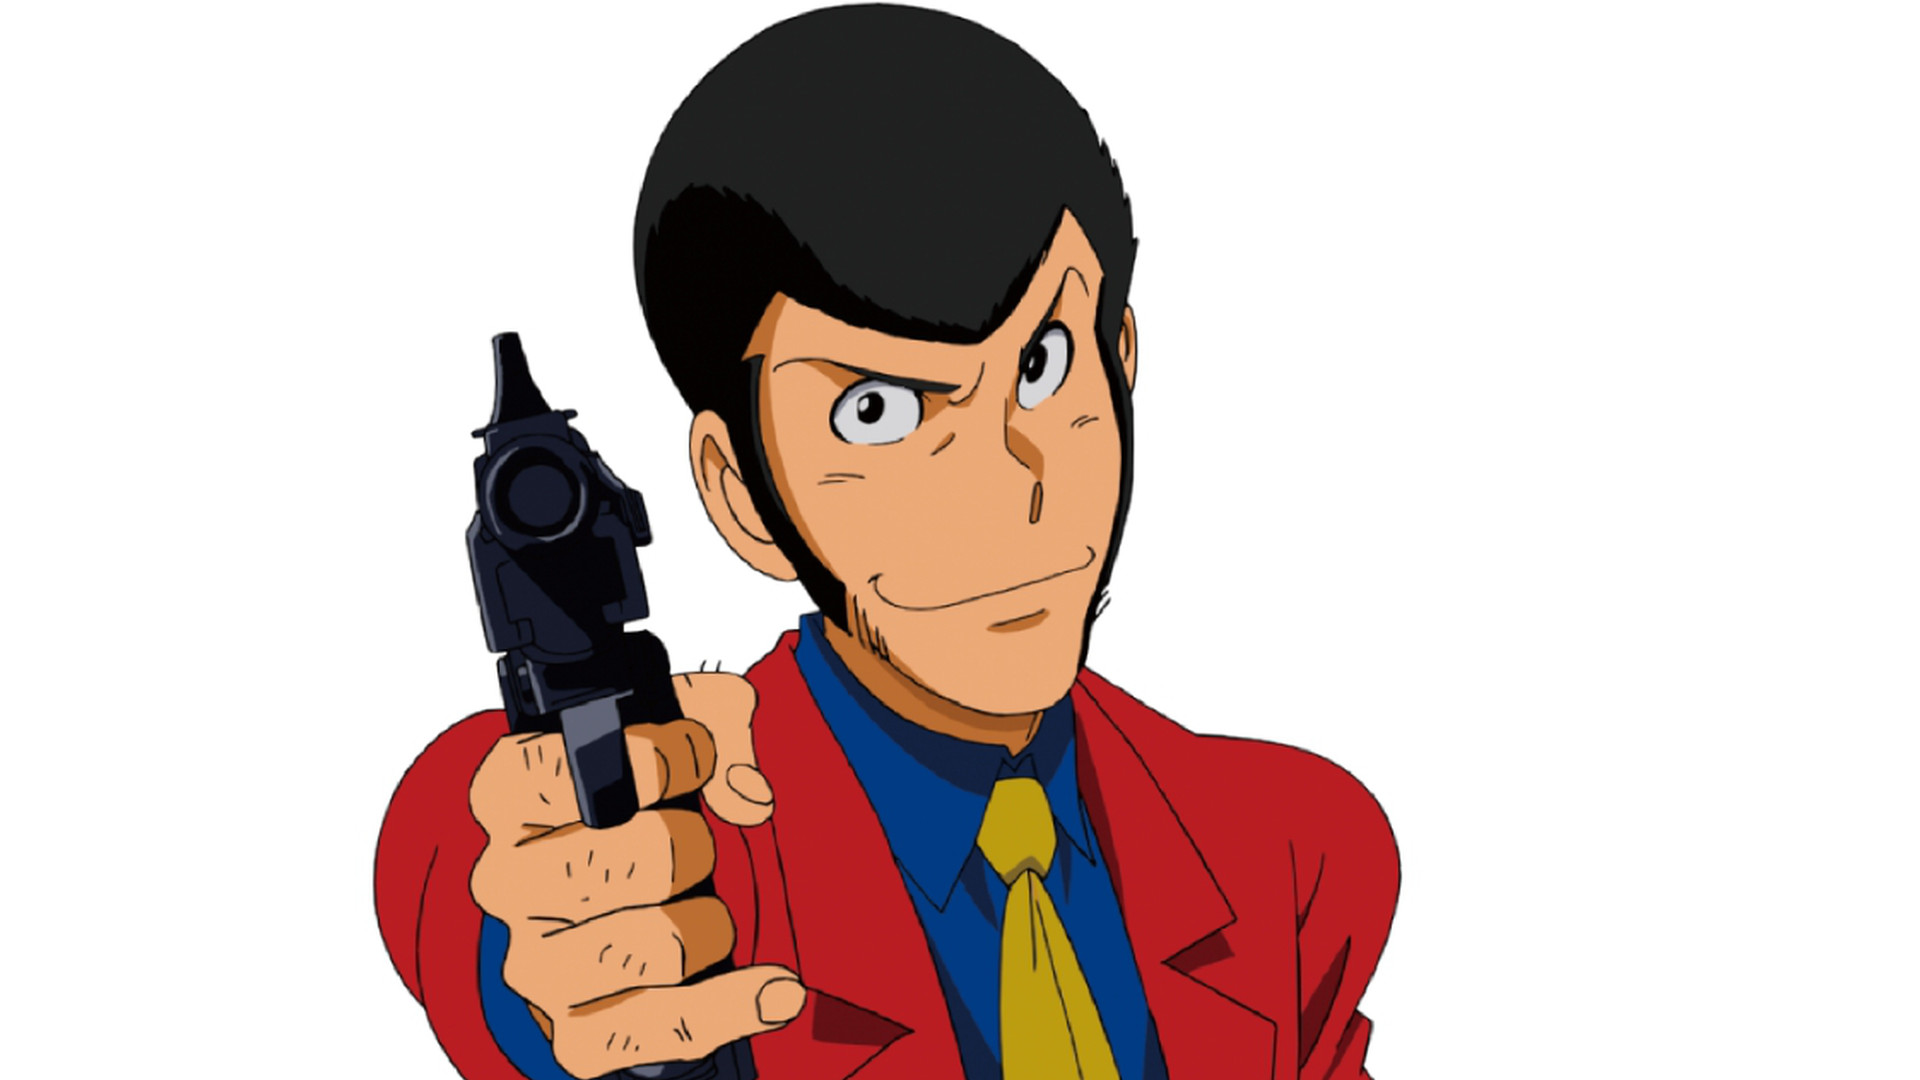 Anime Lupin The Third HD Wallpaper | Background Image